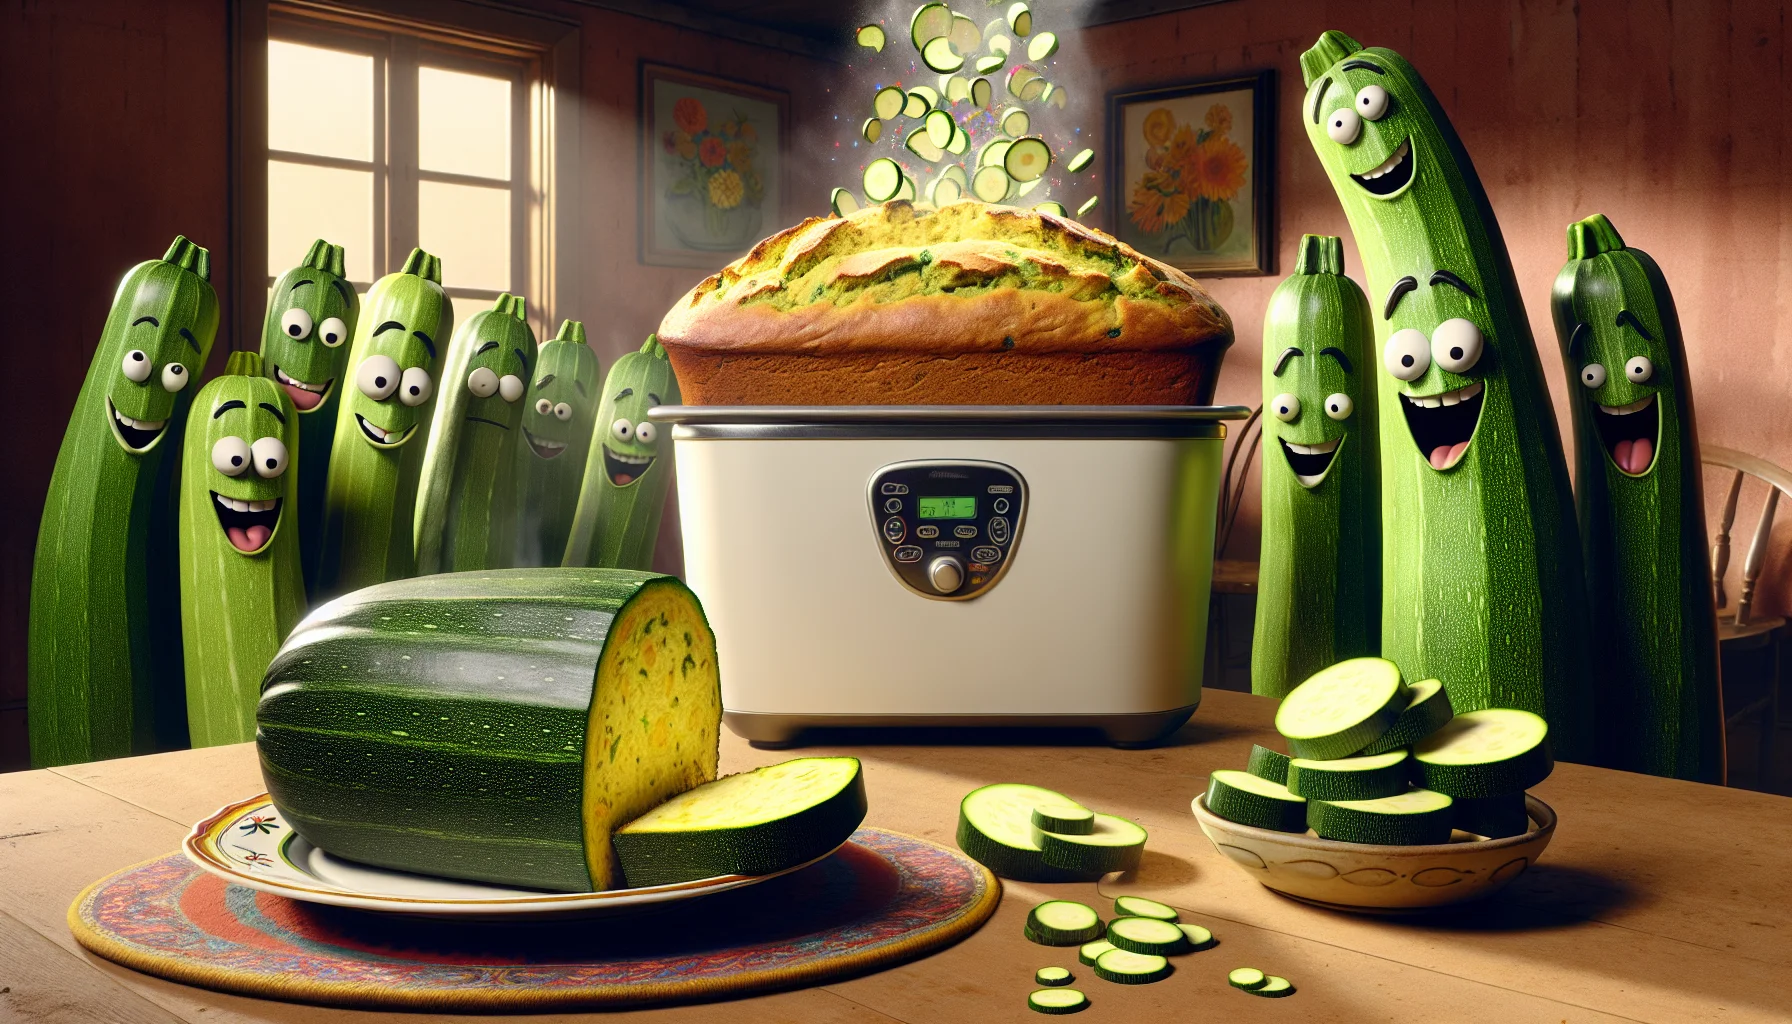 Imagine a humorous and enticing scene depicting freshly baked zucchini bread made from a bread machine. The zucchini bread sits majestically atop an ornate plate, releasing inviting aromas that fill up the room. Around the bread, funny caricatures of animated zucchini are performing a comical skit, perfectly choreographed to demonstrate the easy and low-cost process of making this healthy bread. The vibrantly colored zucchini characters are seen chopping themselves up, joyfully tumbling into the bread machine, and emerging transformed into delicious and nutritious slices of bread. The room emanates warmth, gratitude, humor and disbelief, tantalizing the viewers and encouraging them to adopt this economical and healthy eating alternative.